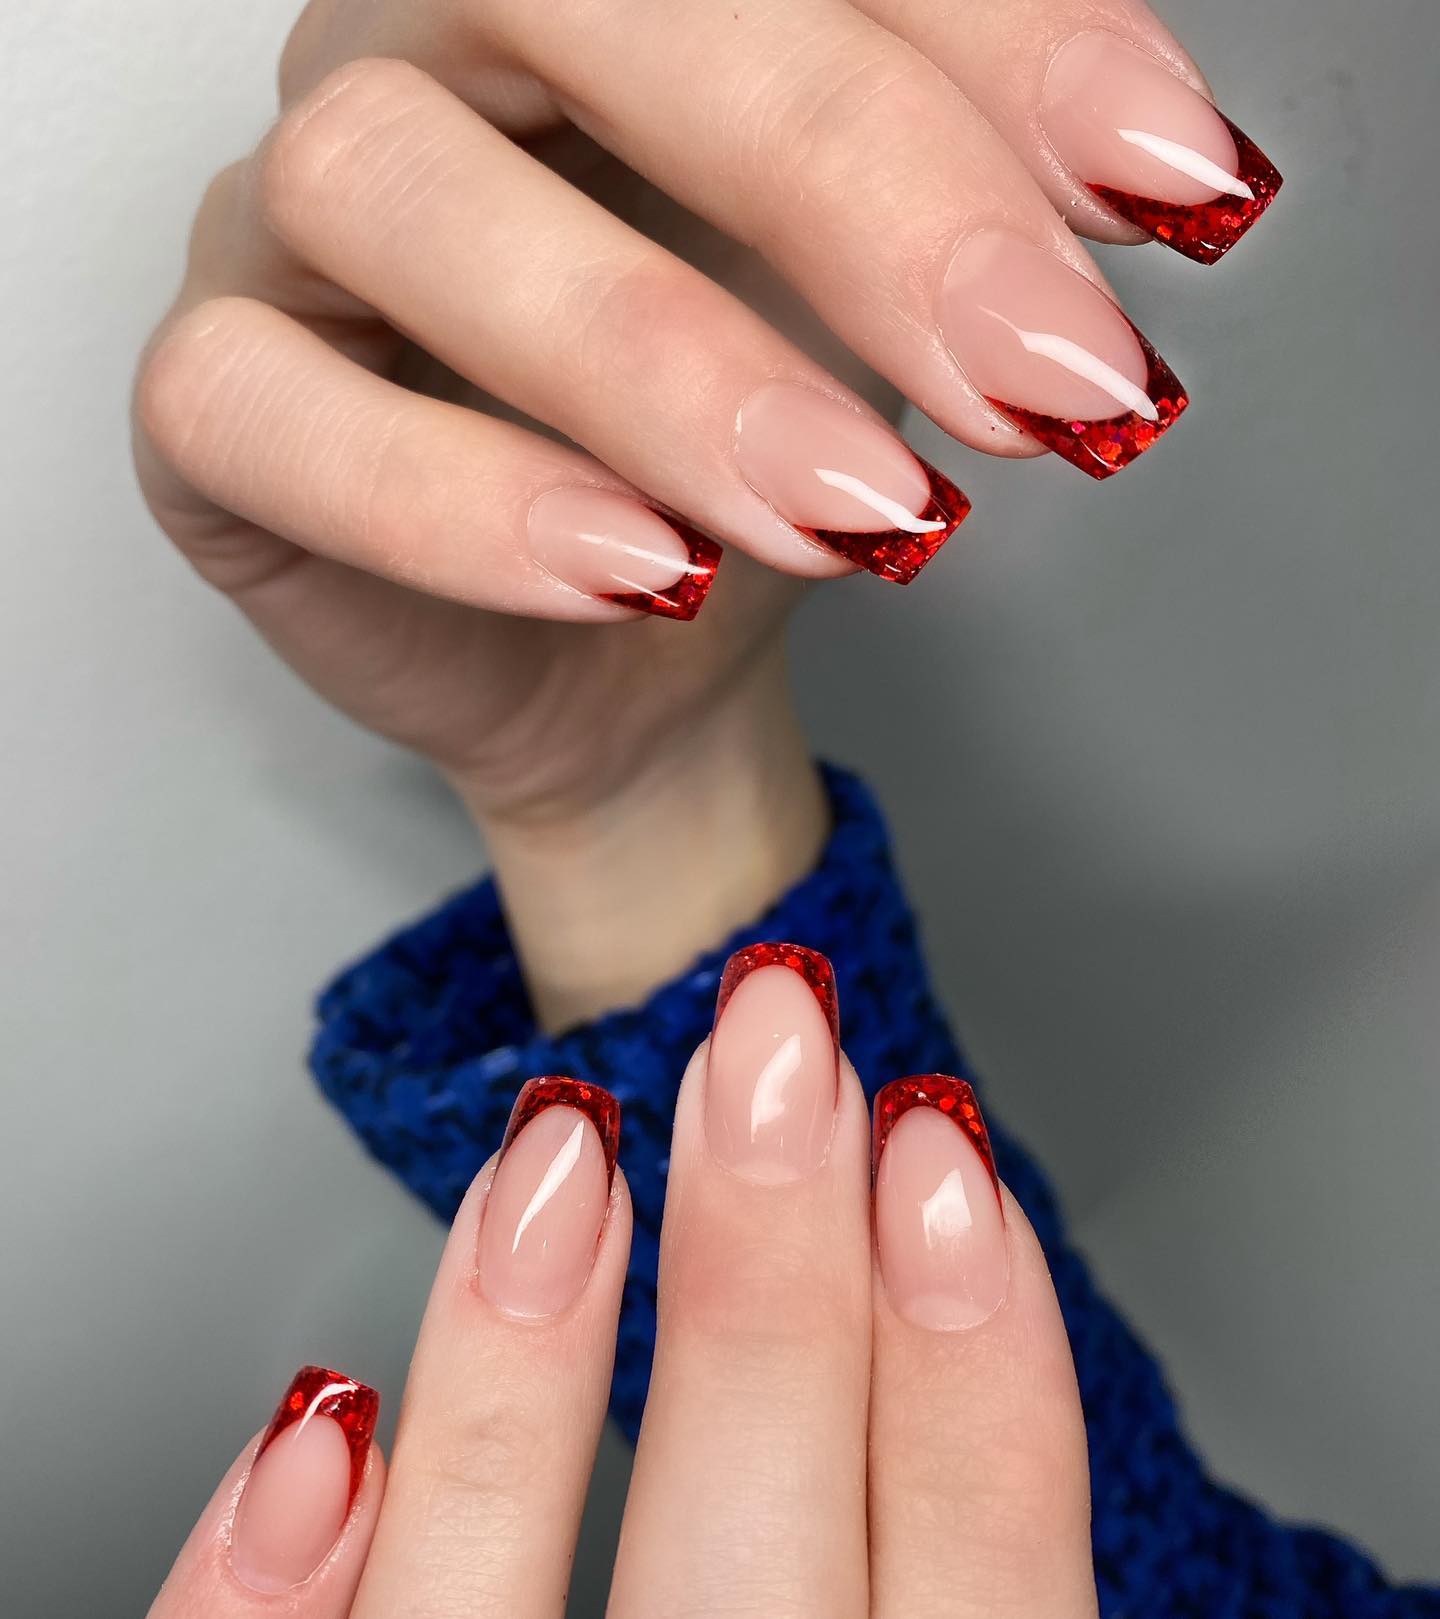 Short Square Nails with Sparkly Red Tips